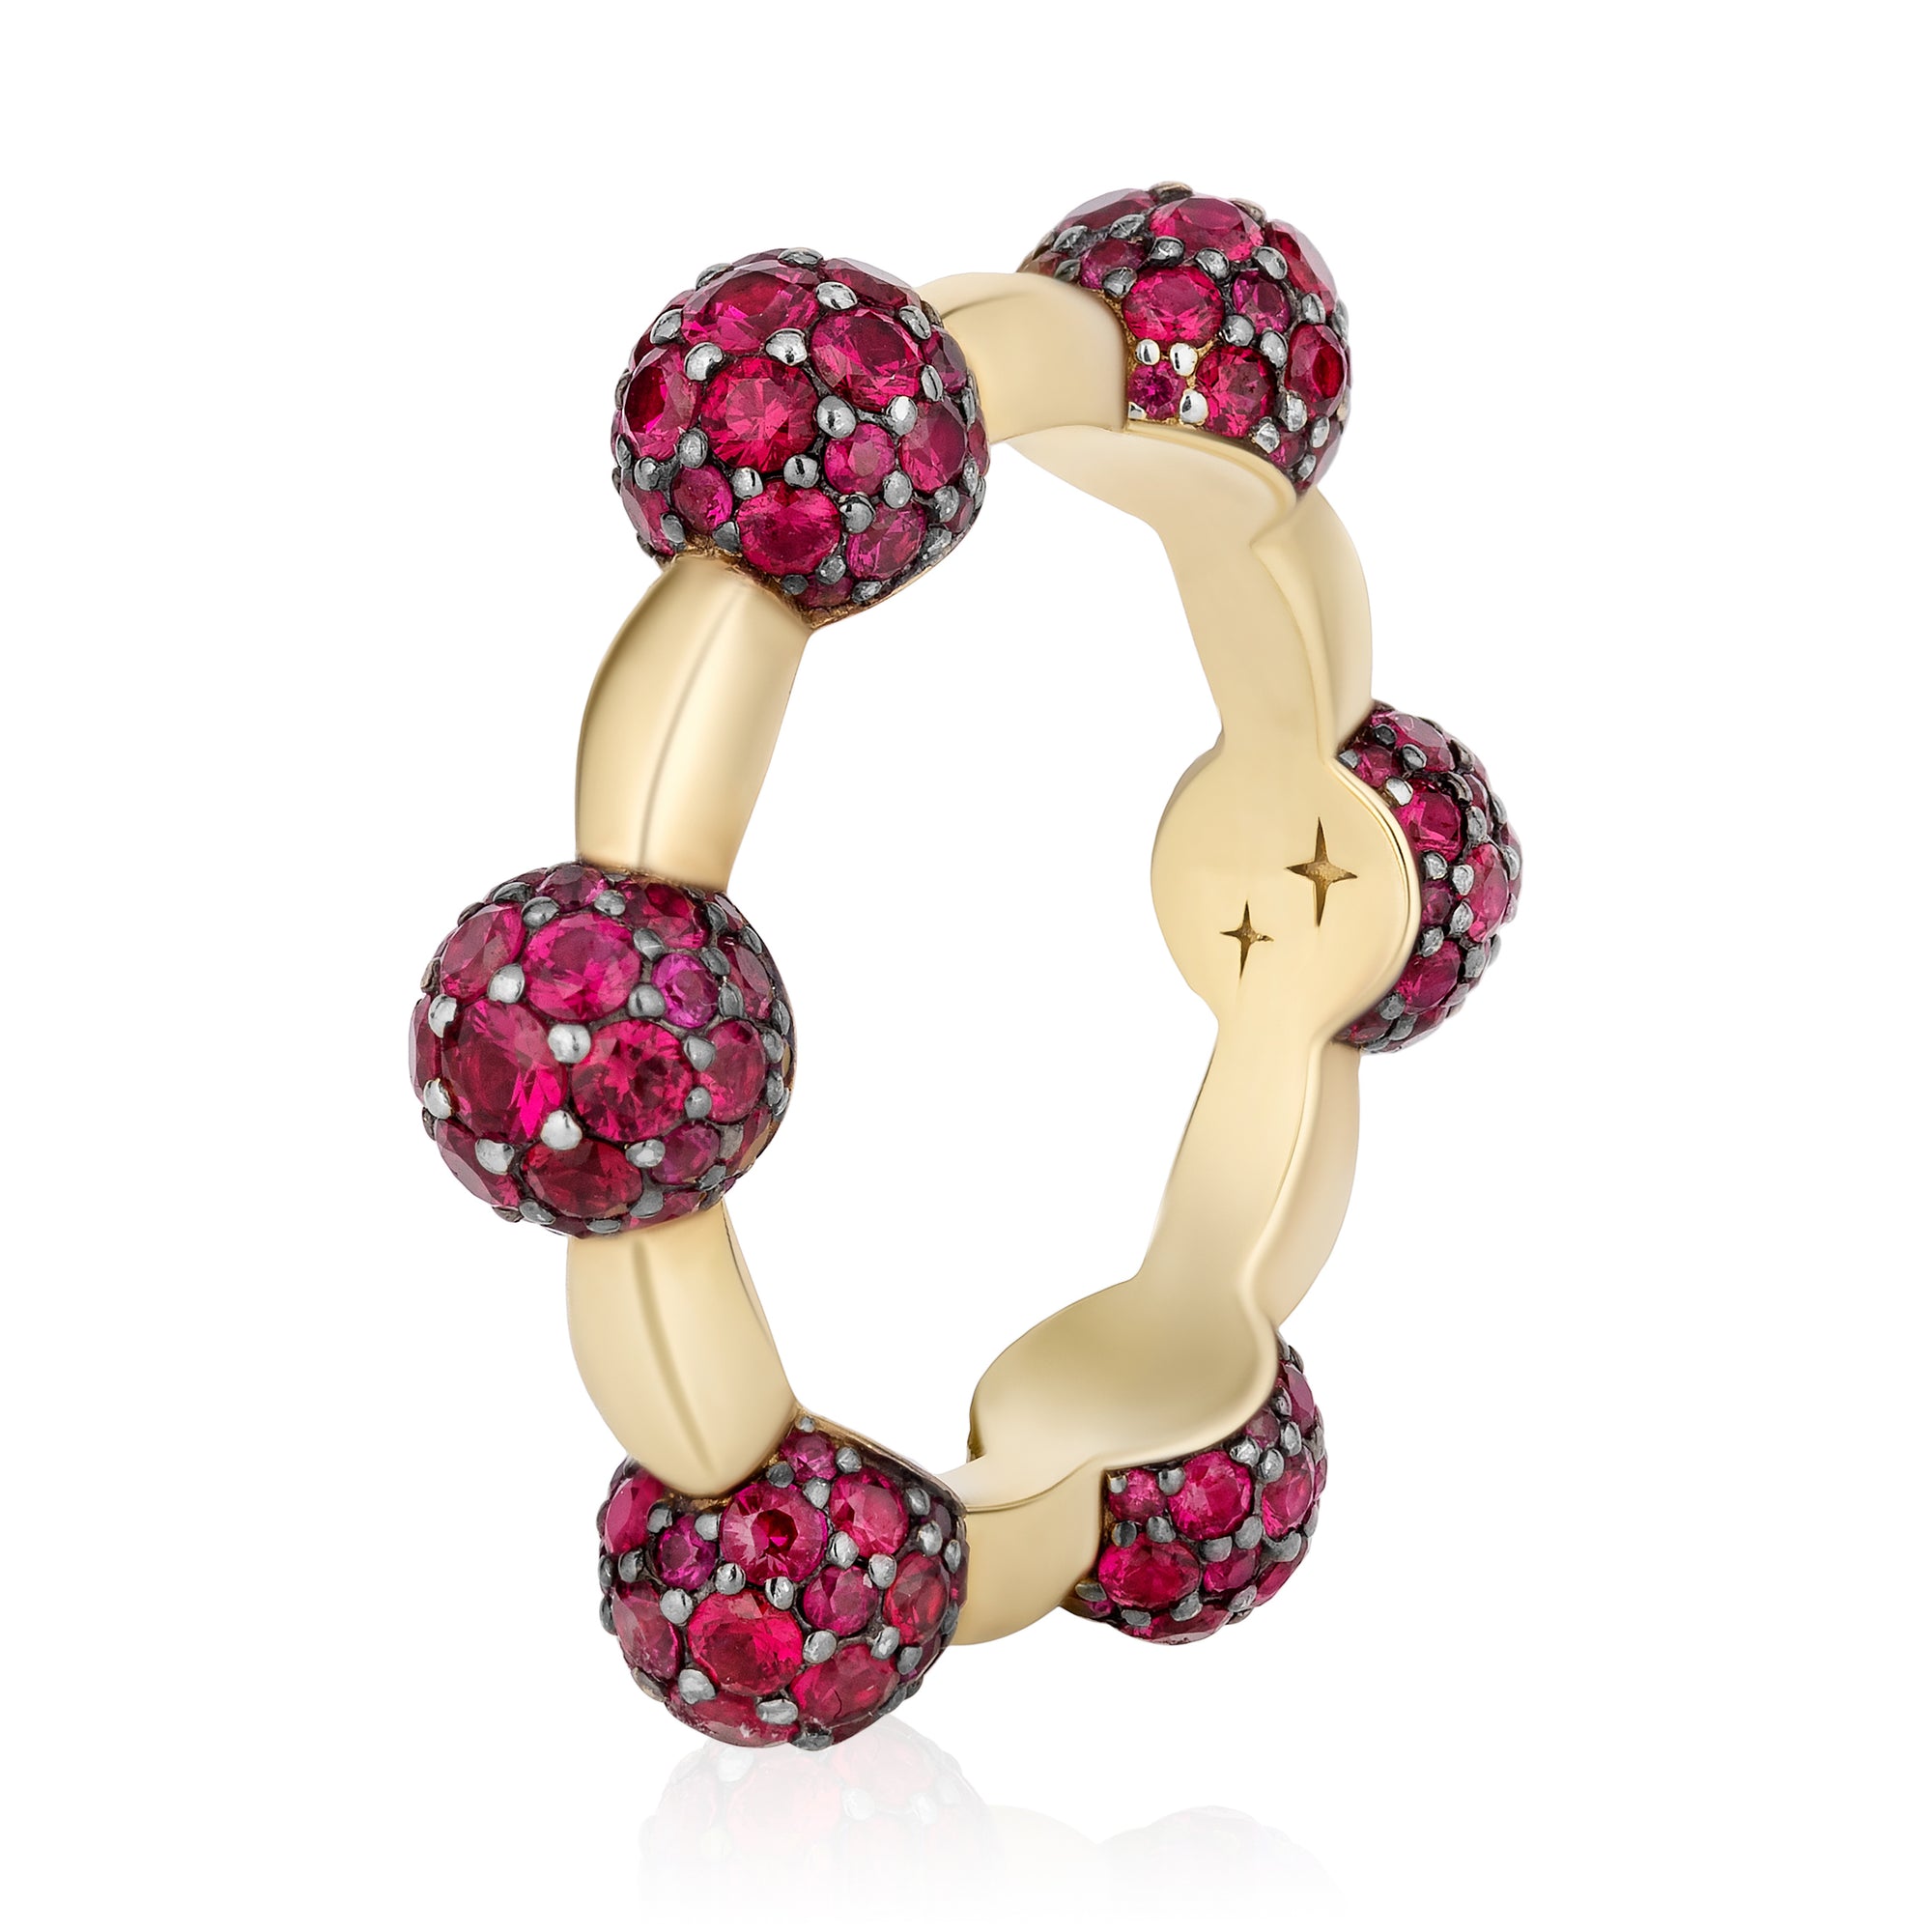 Celestial Ring in Yellow Gold with Rubies